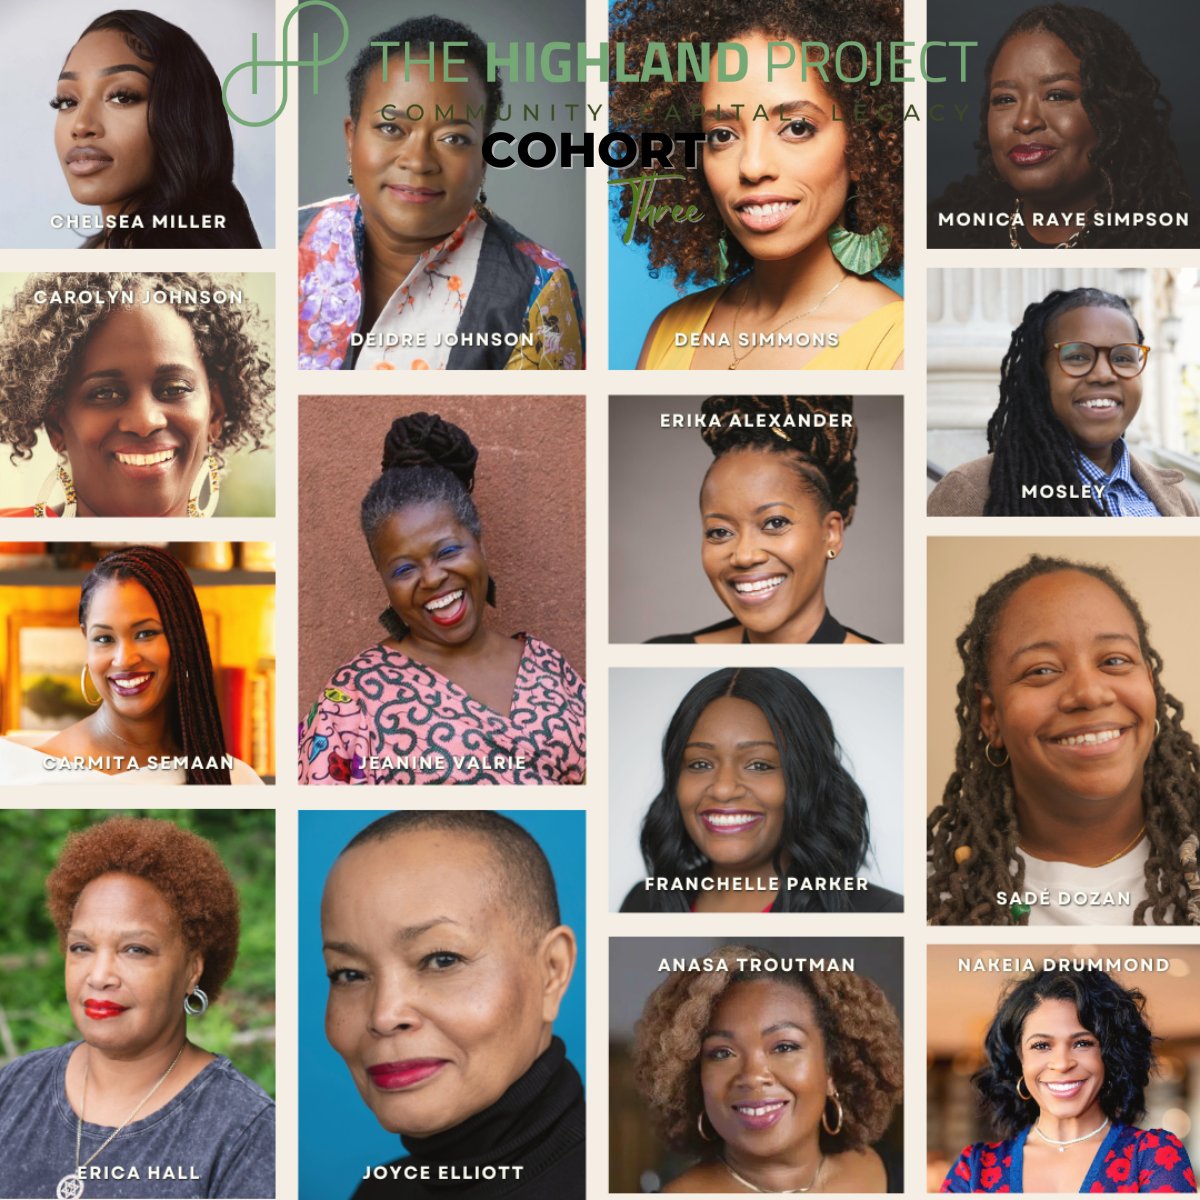 Introducing the third cohort! The Highland Project coalition of Black women leaders -15 innovators from across the nation, sectors, and generations building on their lived experiences and dreams of Black women in America. @LeadHighland #HighlandSigningDay #InvestinBlackWomen